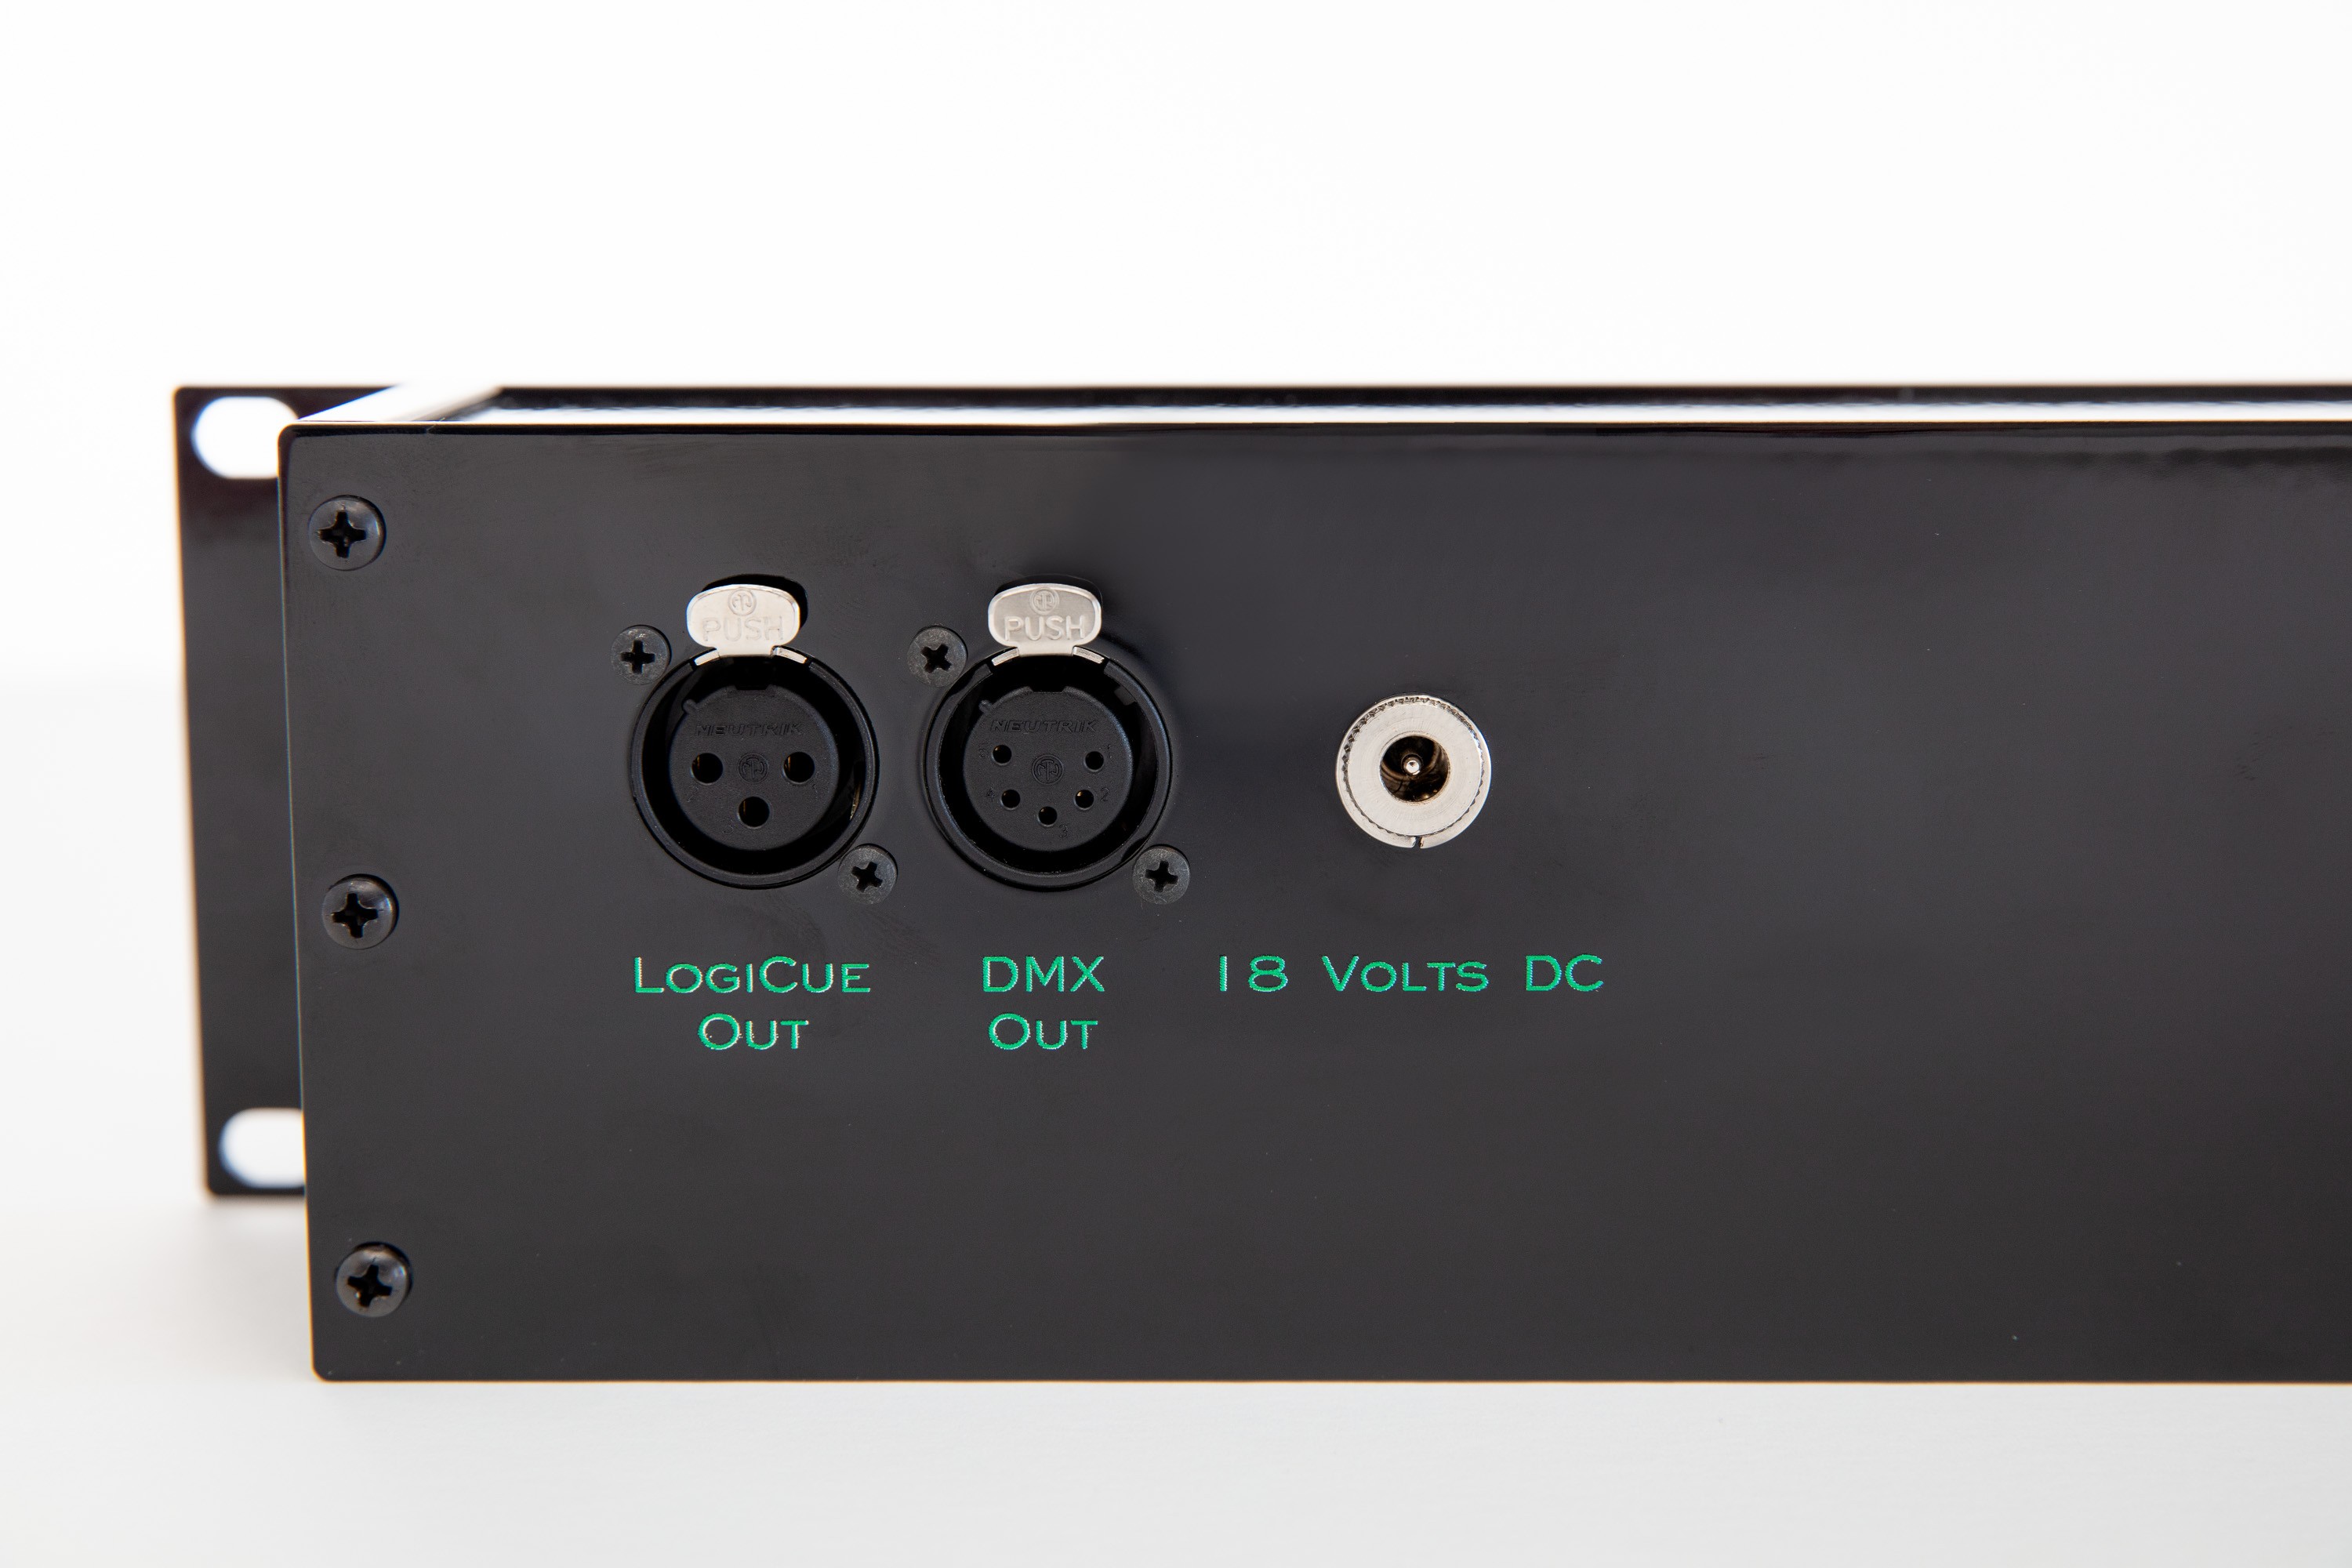 The LogiCue LC12 Digital Cue Light Controller, part of the LogiCue System of cue lights.